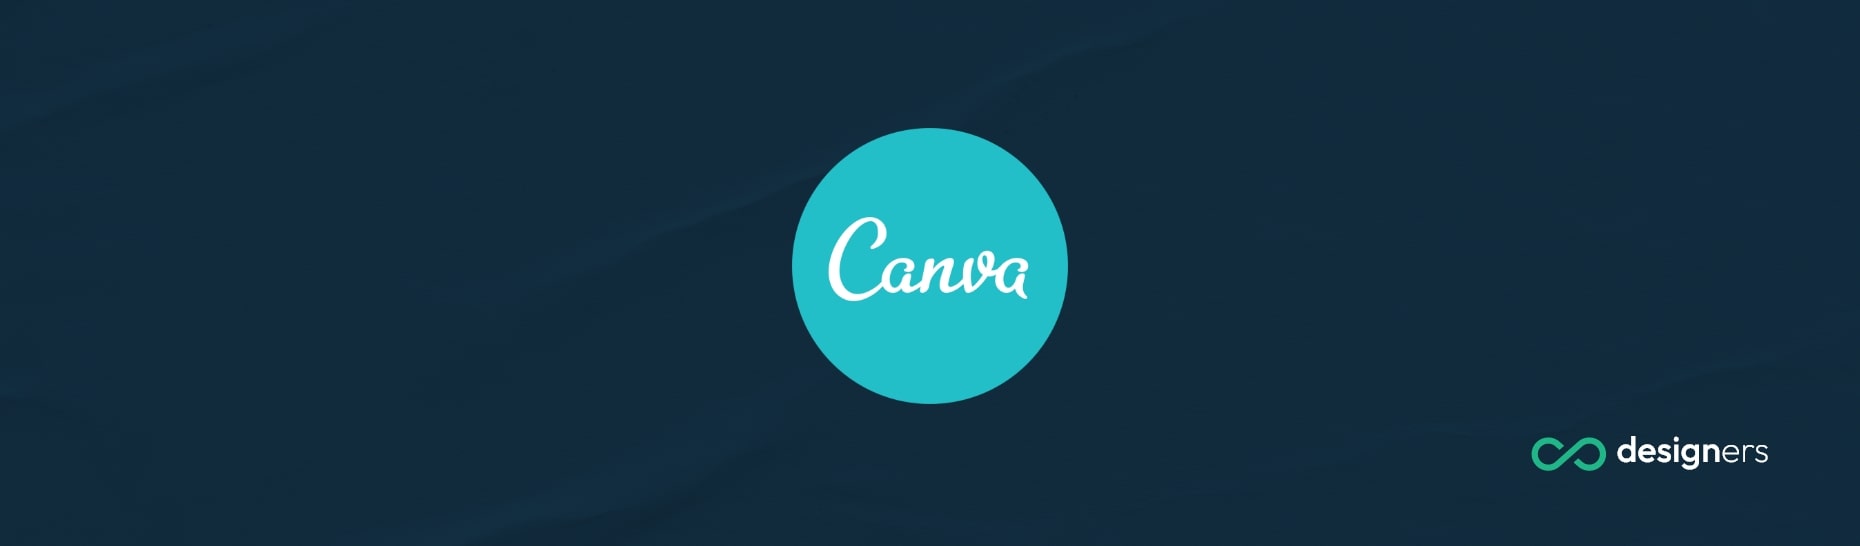 Can I Make a Table of Contents in Canva?